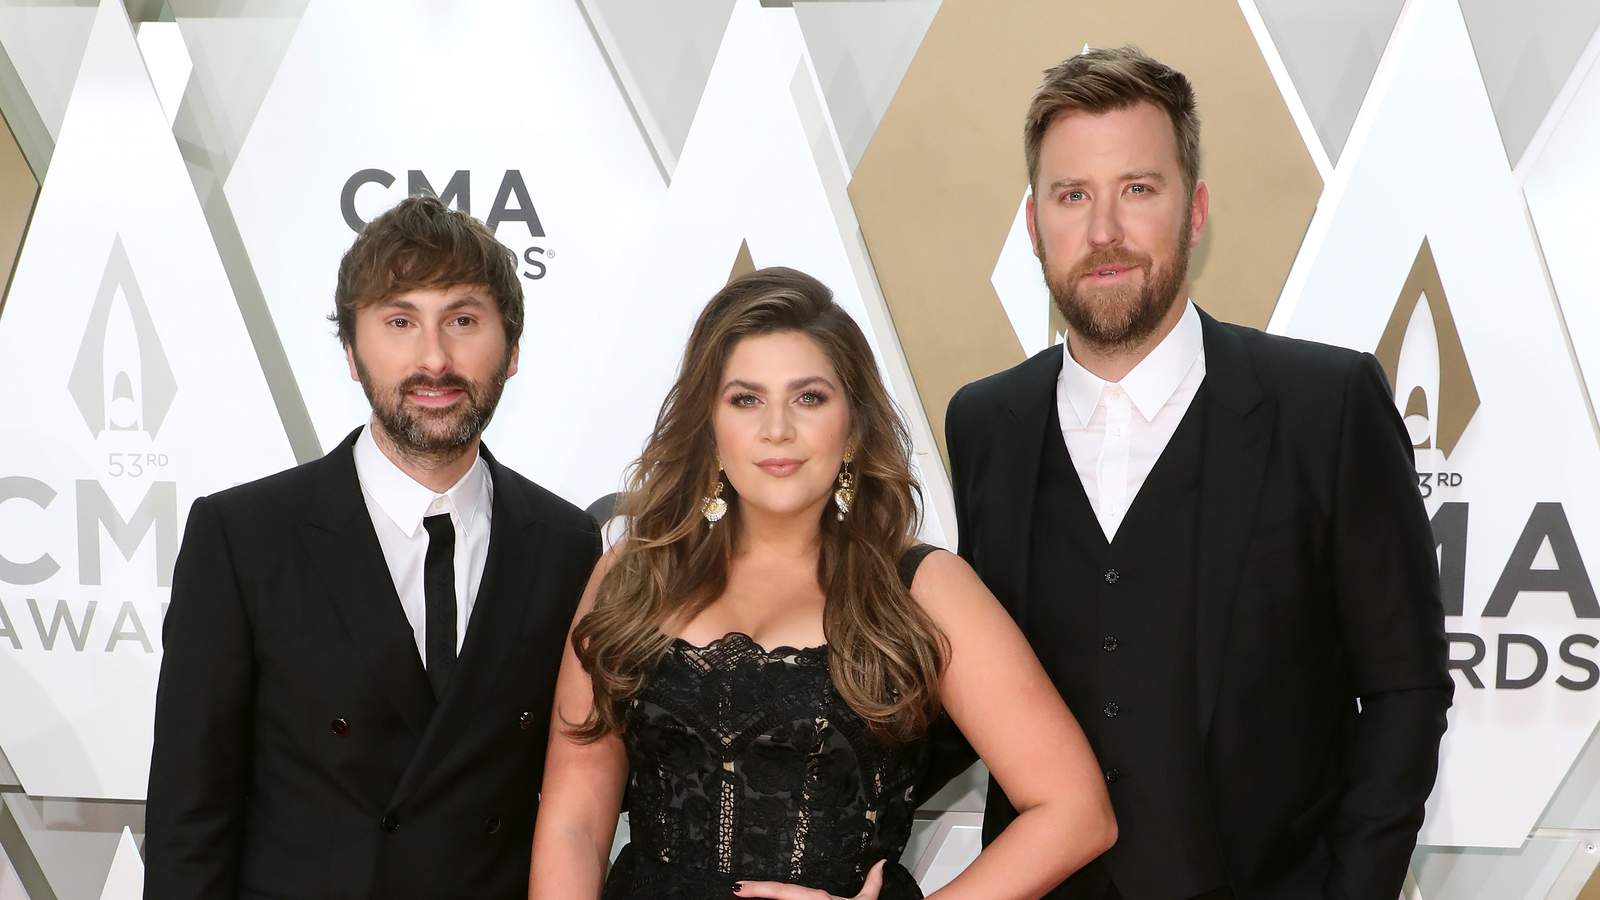 Country music group Lady Antebellum changing its name to Lady A